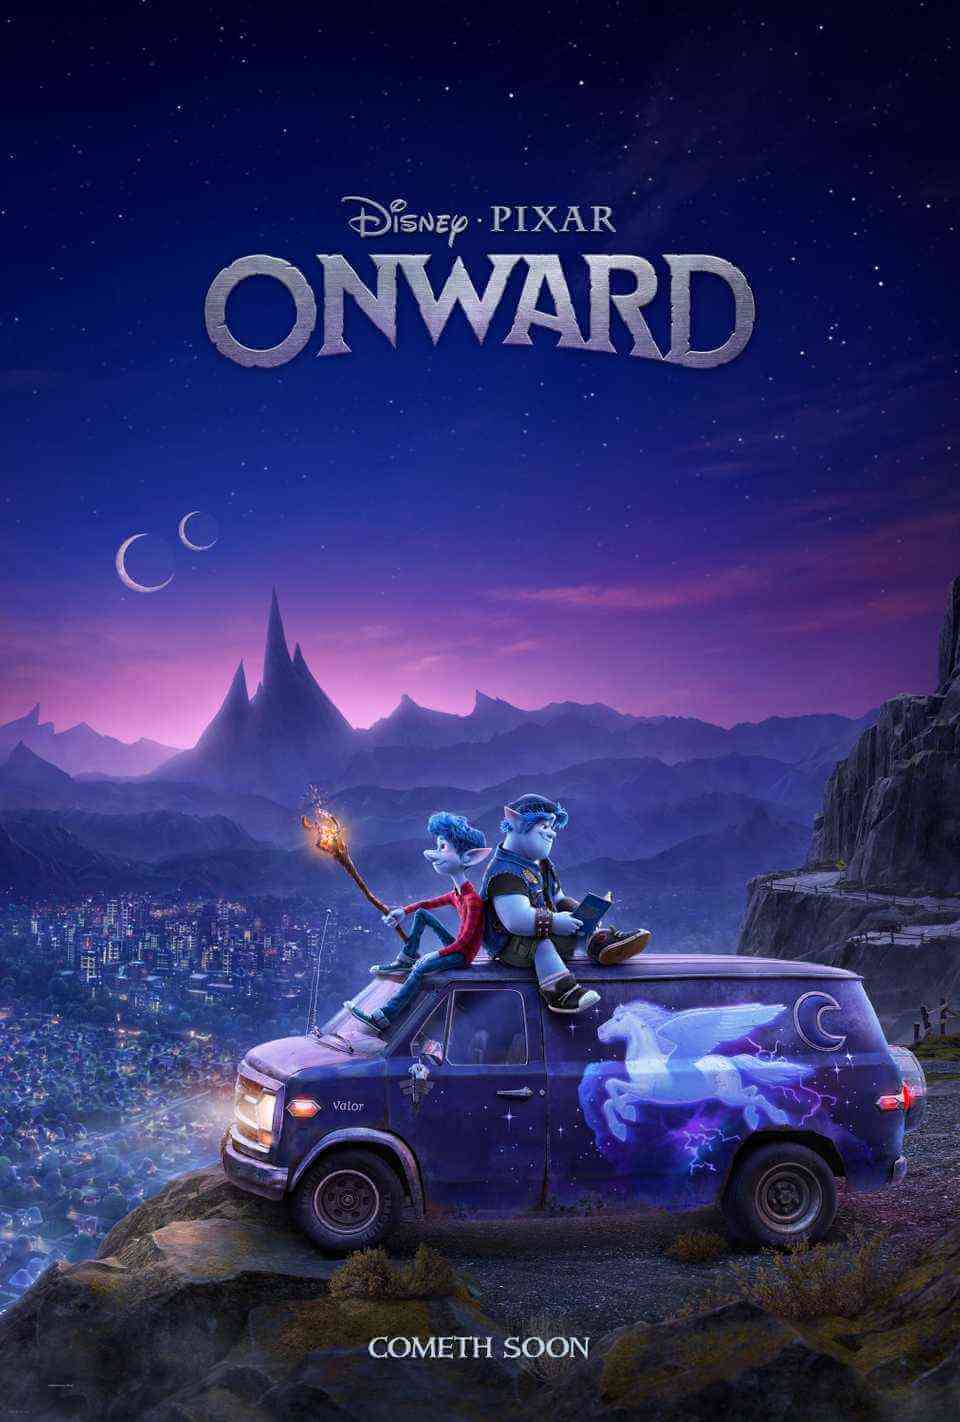 pixar-onward-movie-review-box-office-collection-report-trailer-review